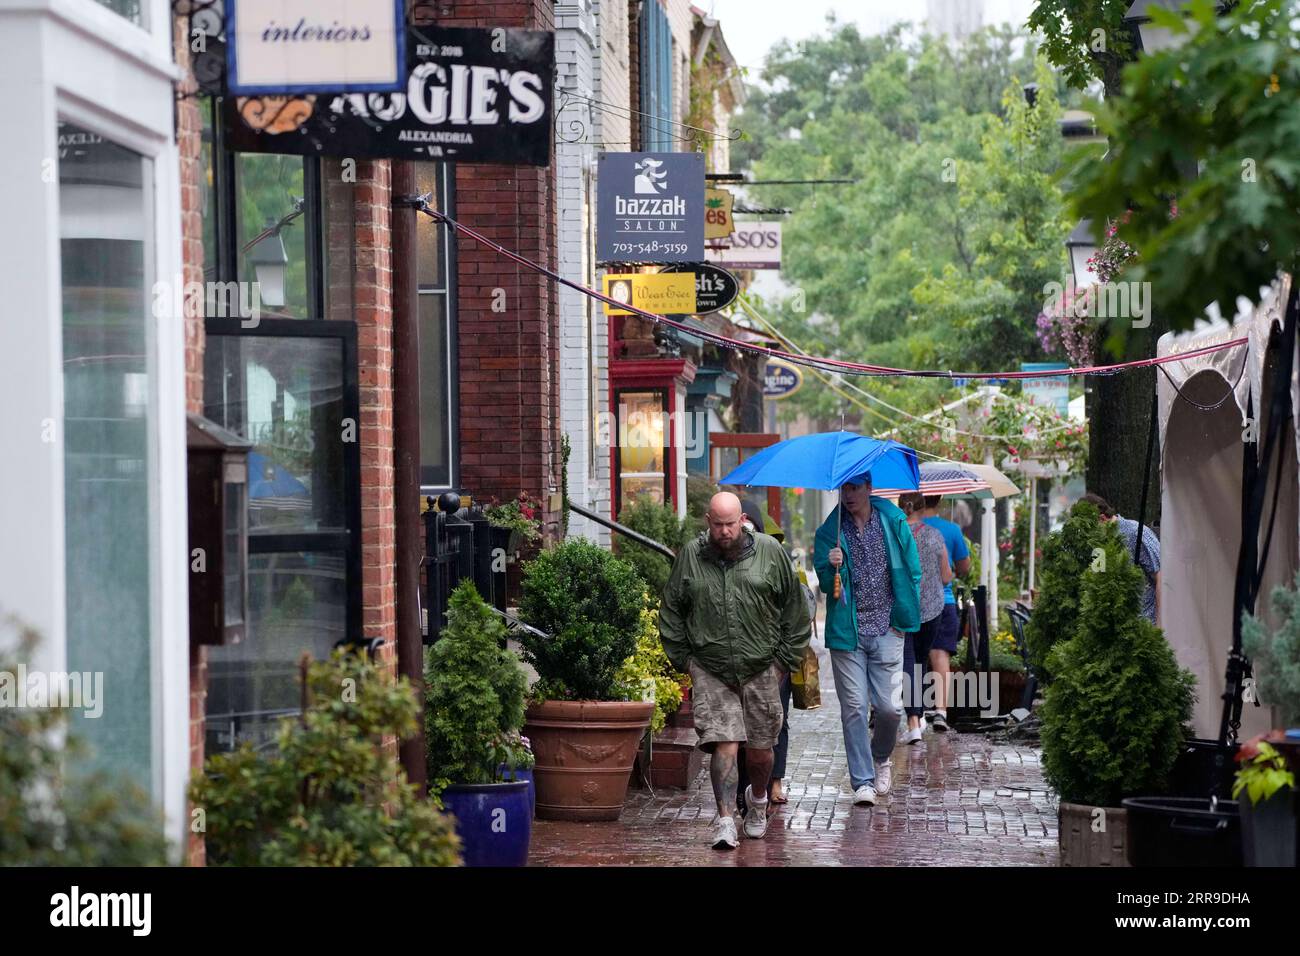 210611 -- ALEXANDRIA, June 11, 2021 -- People walk on the street in Old Town Alexandria, Virginia, the United States, on June 10, 2021. U.S. consumer prices rose 0.6 percent in May, with a 12-month increase of 5.0 percent, the U.S. Labor Department reported Thursday. That marks the largest 12-month increase since a 5.4-percent increase for the period ending August 2008, according to the report. Photo by /Xinhua U.S.-ECONOMY-CPI TingxShen PUBLICATIONxNOTxINxCHN Stock Photo